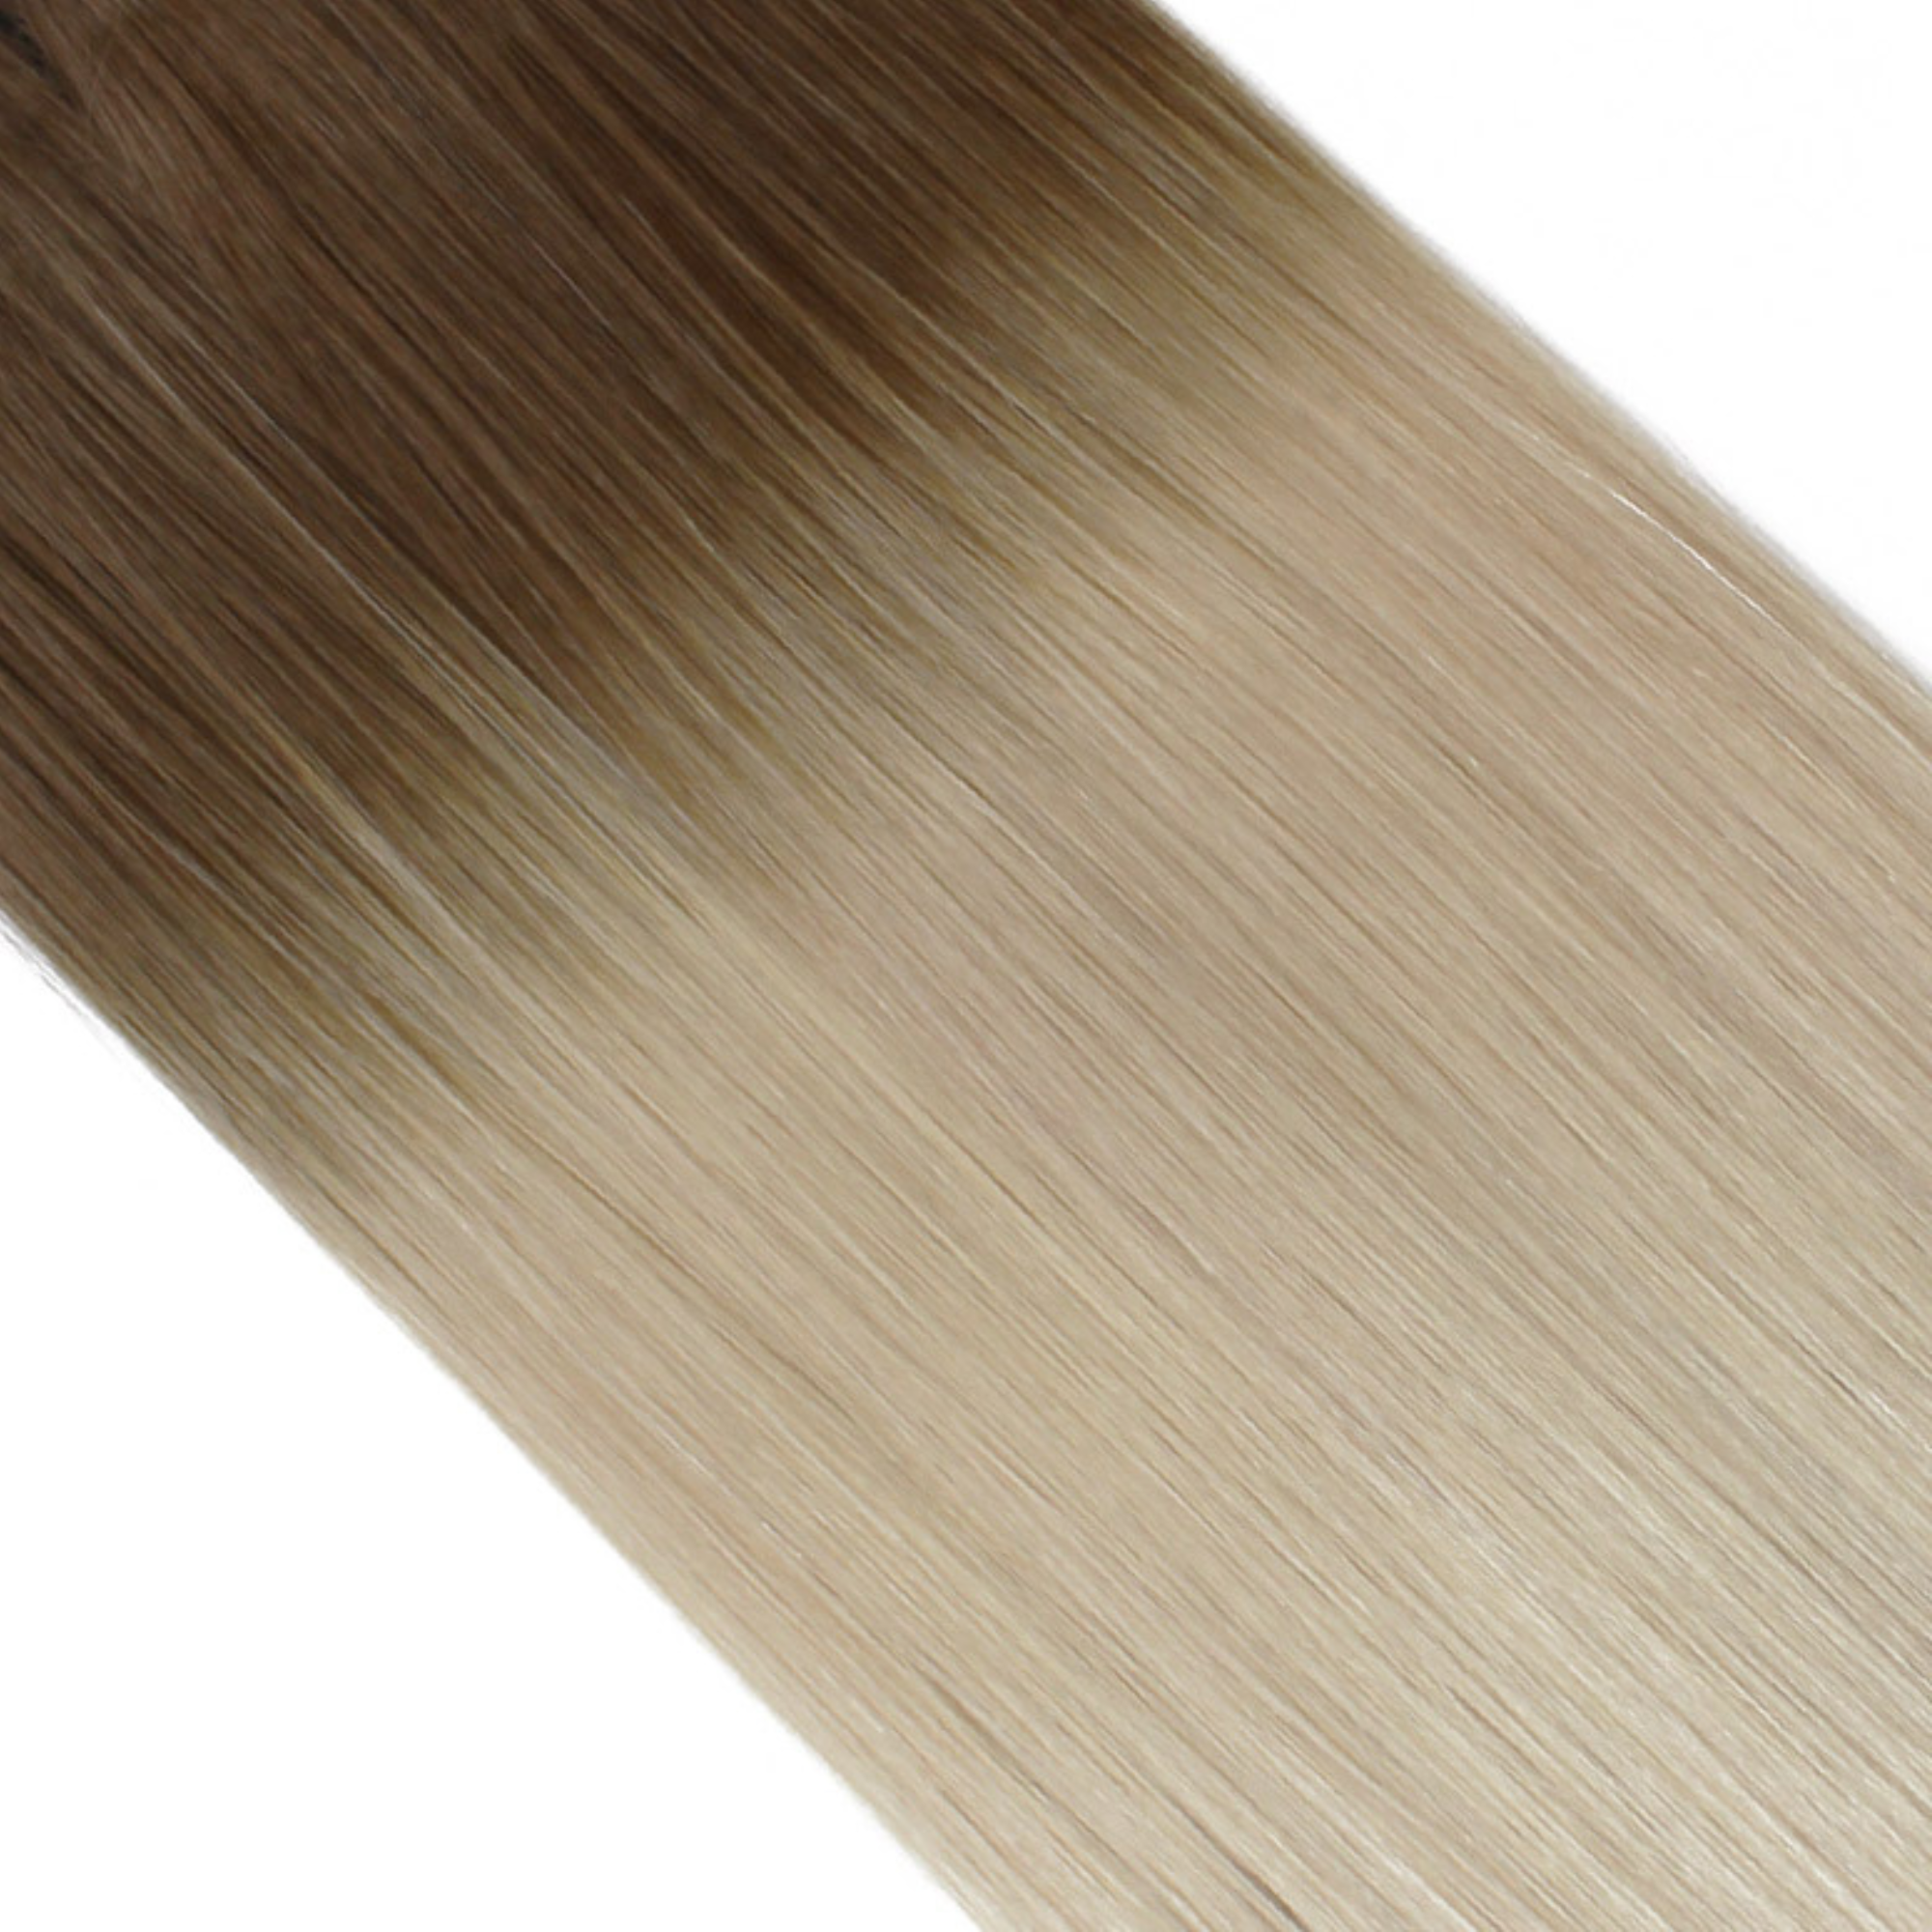 "hair rehab london 18" tape hair extensions shade swatch titled rooted blonde af"